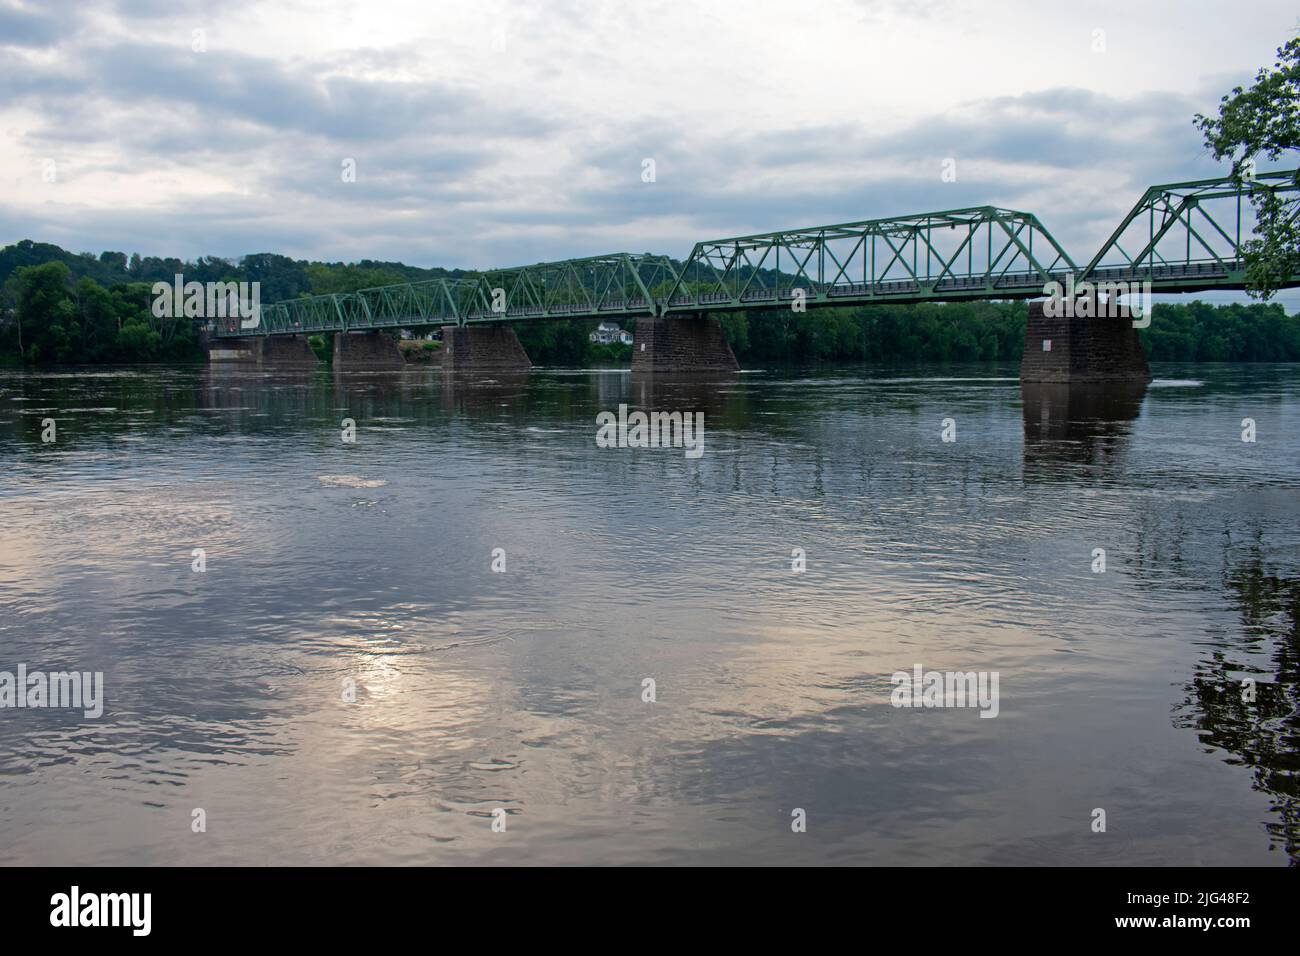 Narrow metal truss bridge crossing the Delaware River between the towns of Frenchtown, New Jersey, and Uhlerstown, Pennsylvania -03 Stock Photo